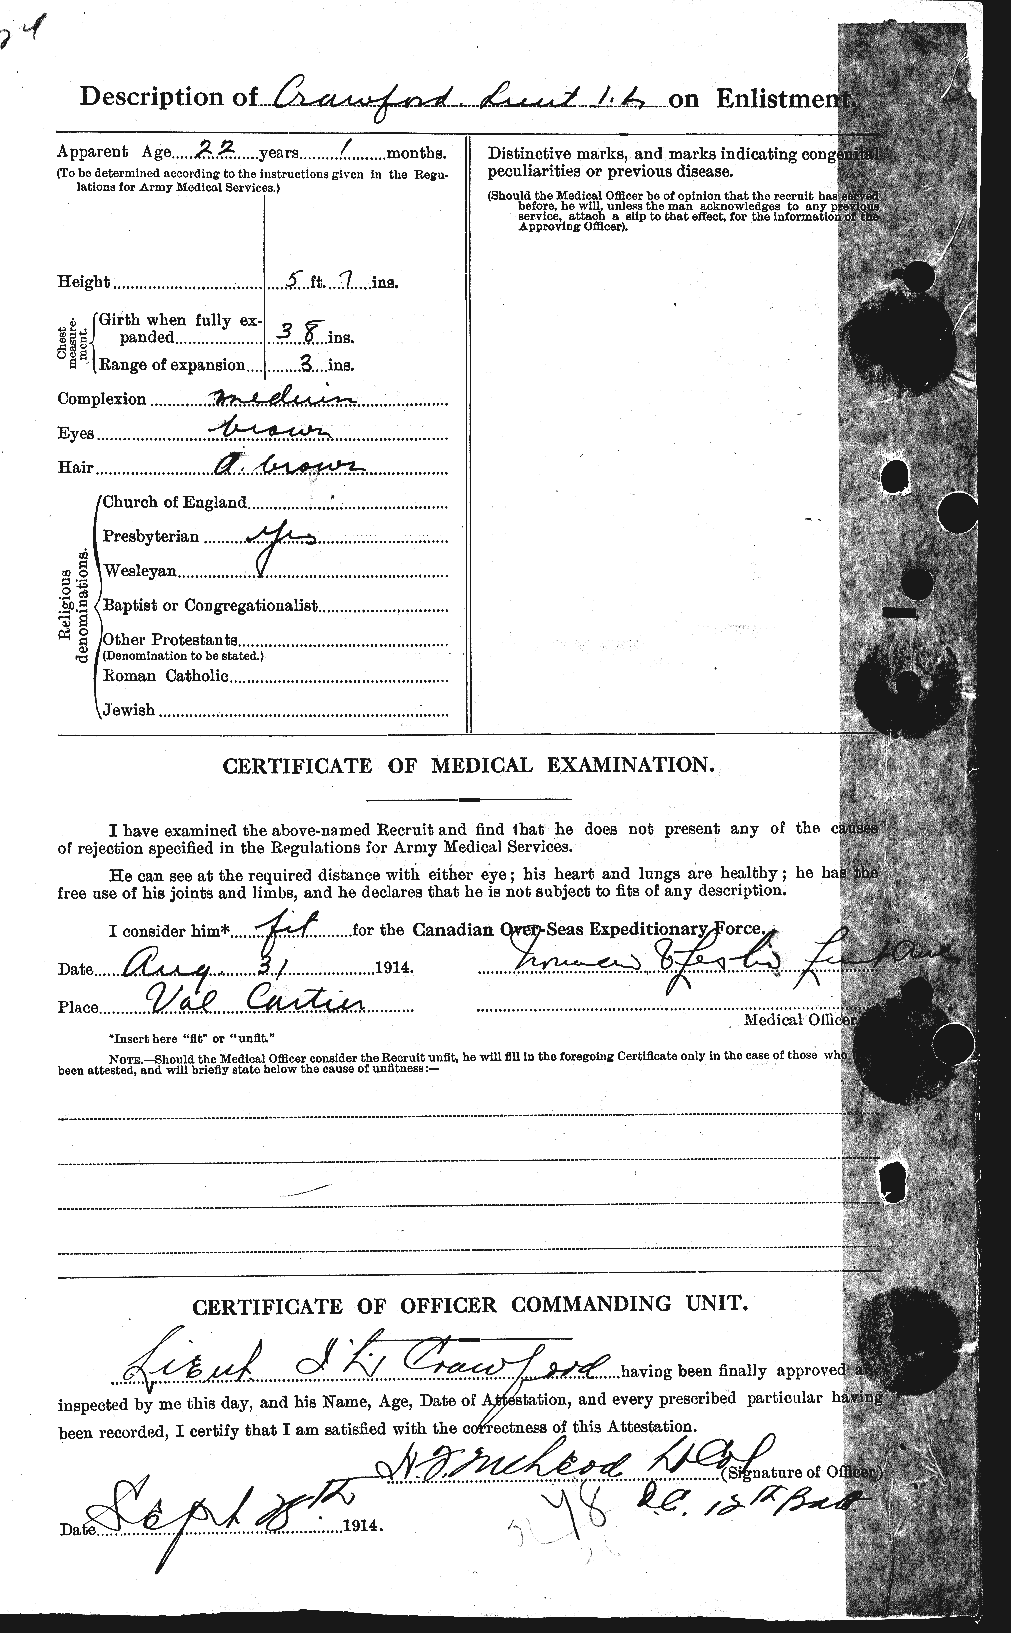 Personnel Records of the First World War - CEF 061366b